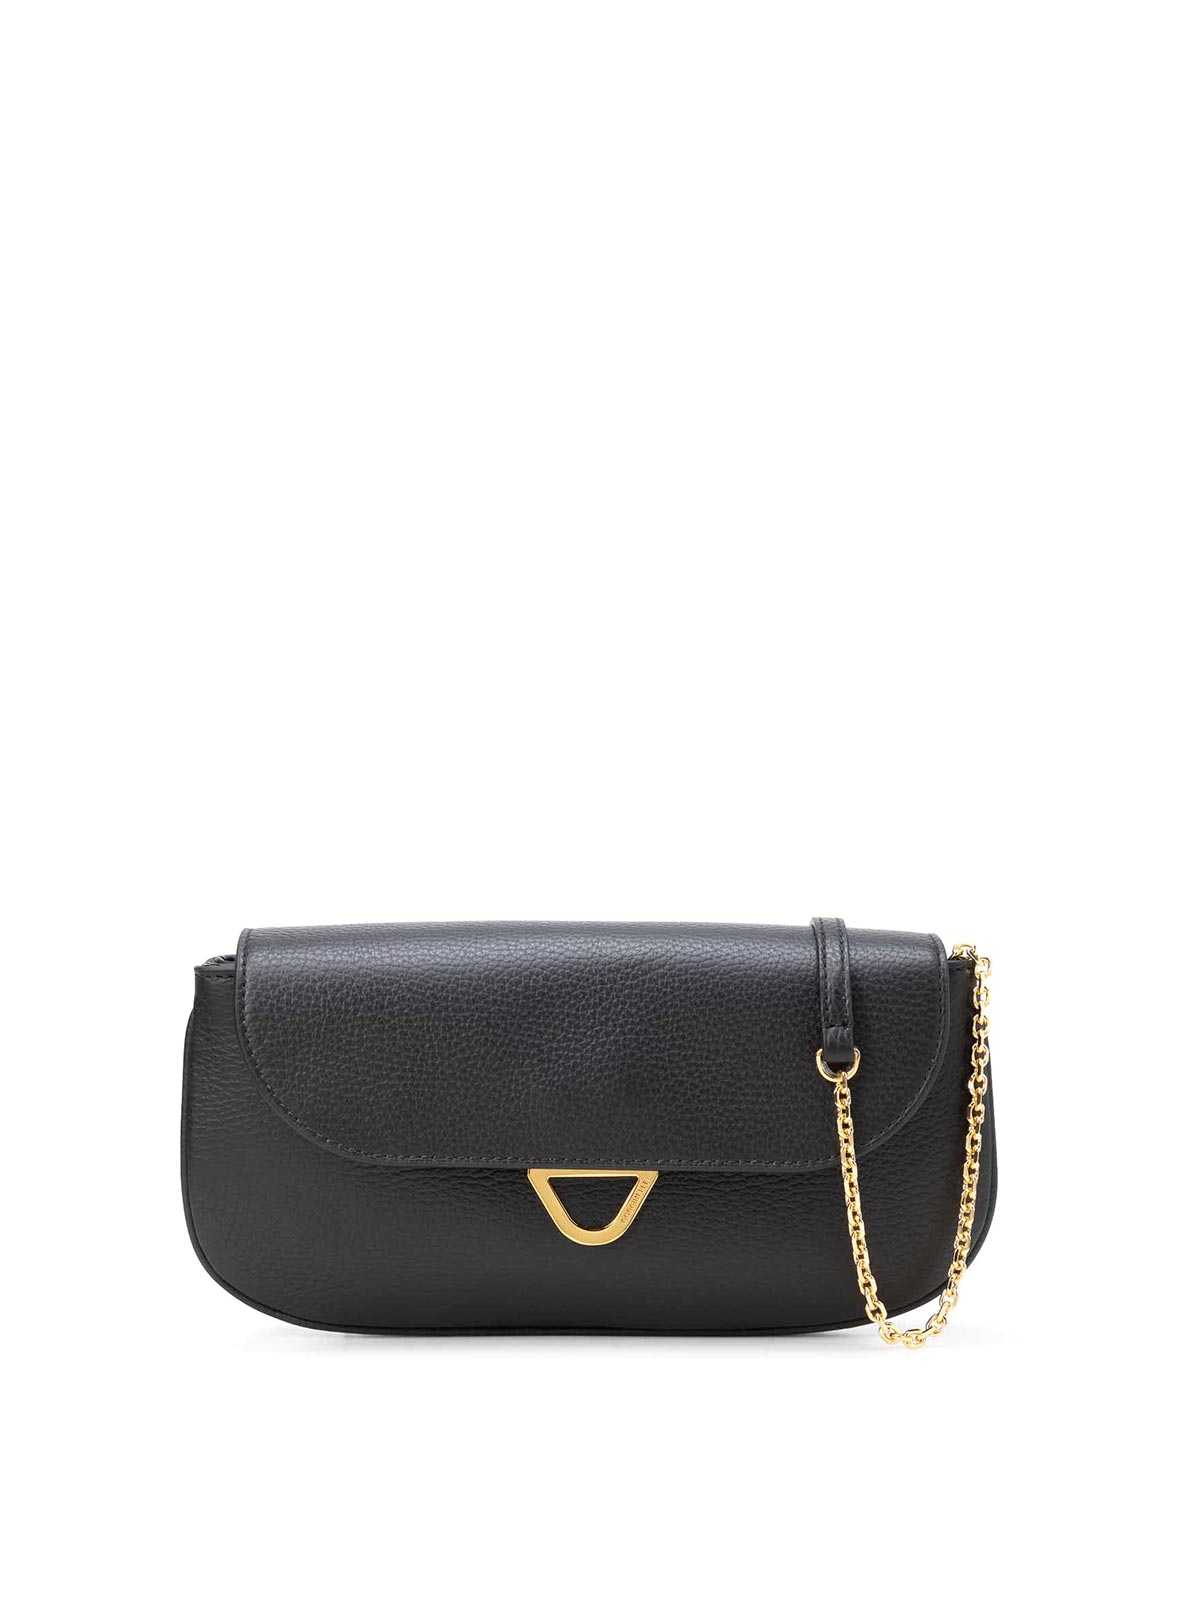 Coccinelle Logo Leather Bag In Black